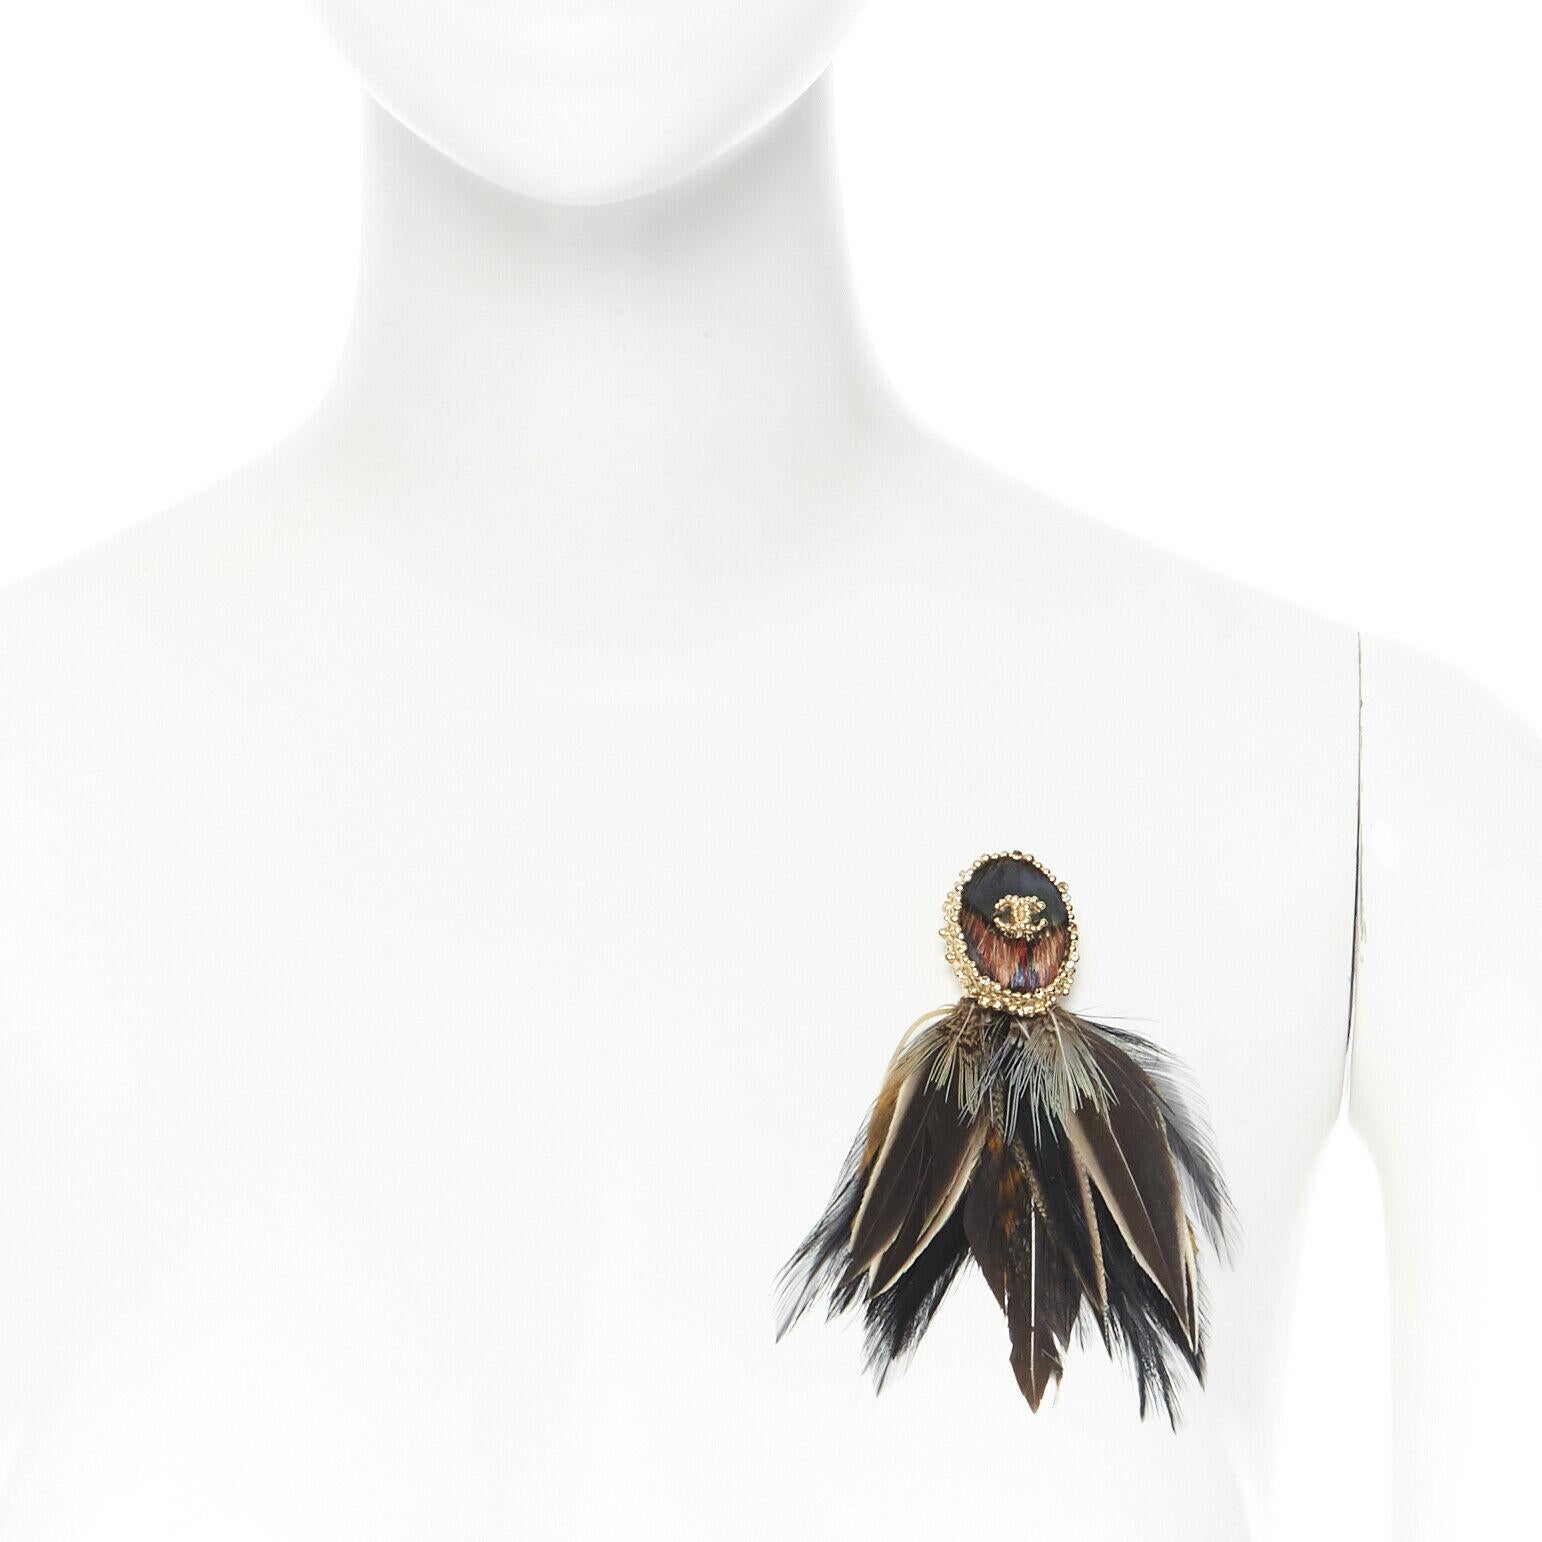 new CHANEL KARL LAGERFELD gold crystal embellished CC feather pin brooch
Brand: CHANEL
Designer: Karl Lagerfeld
Model Name / Style: Feather brooch
Material: Other; Gold-tone metal, feathers
Color: Gold
Pattern: Solid
Extra Detail: Silver-tone metal.